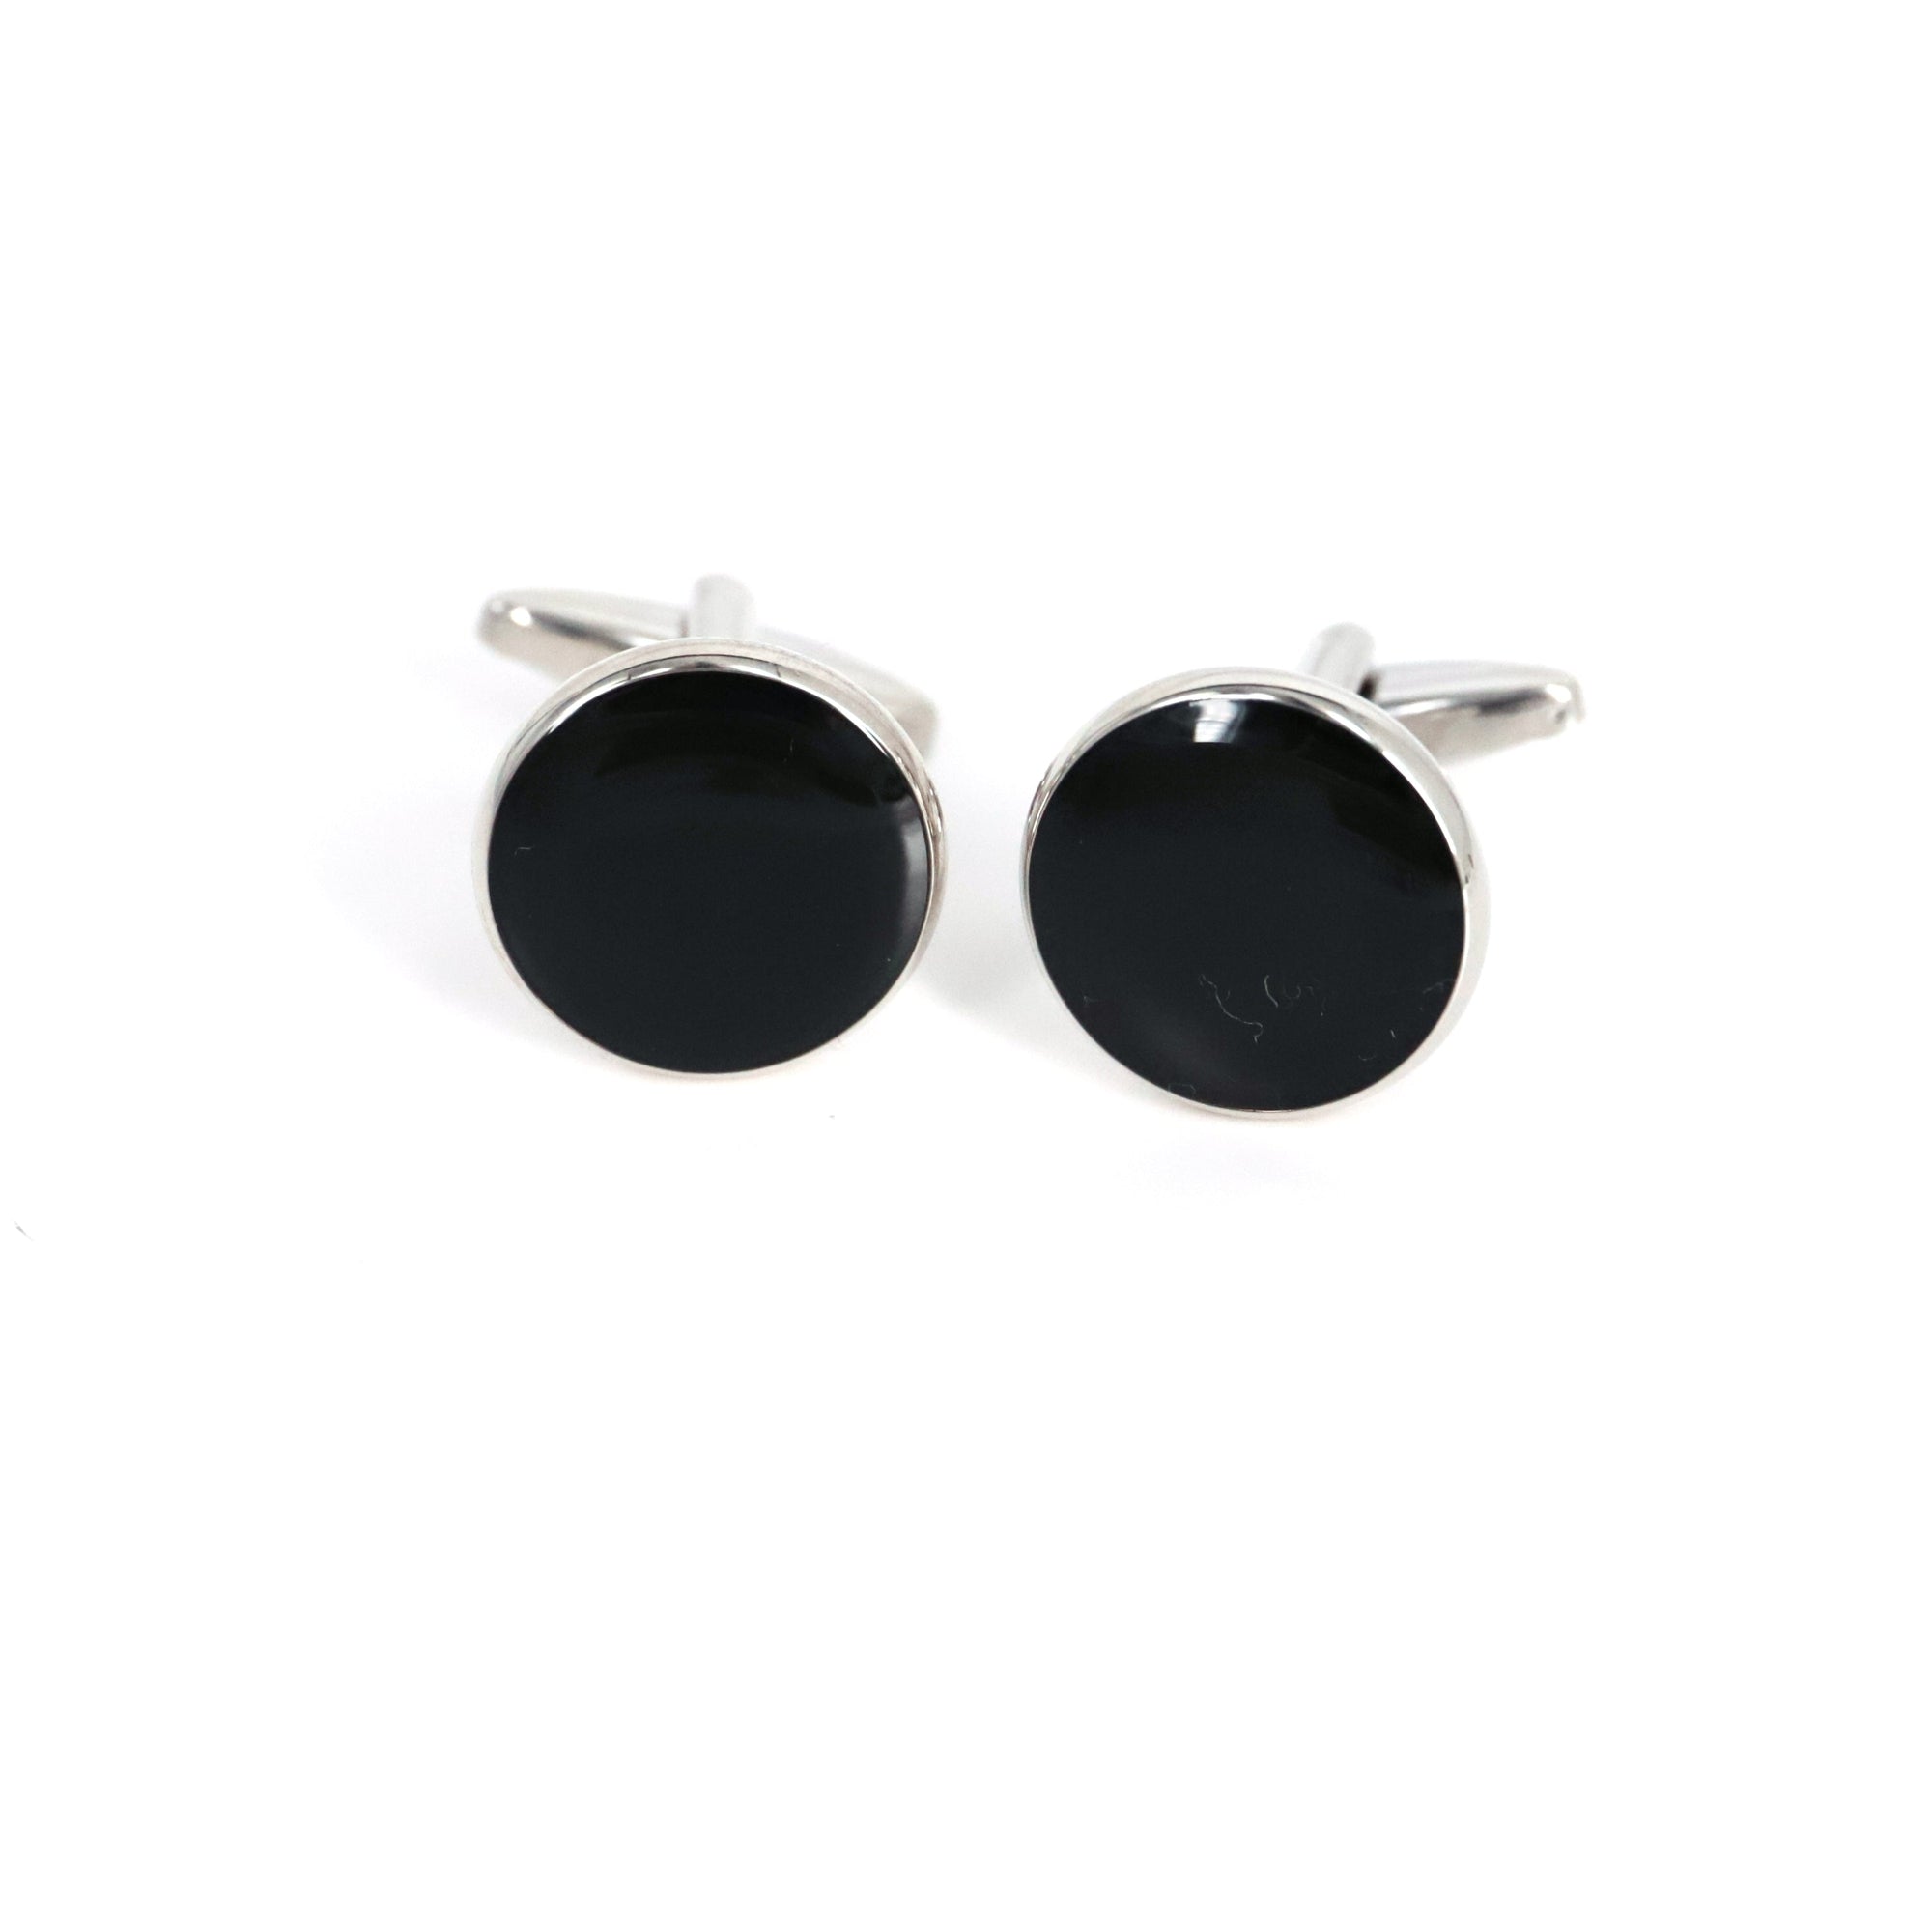 Men's Tuxedo Cufflinks and Studs - Black Onyx with Silver